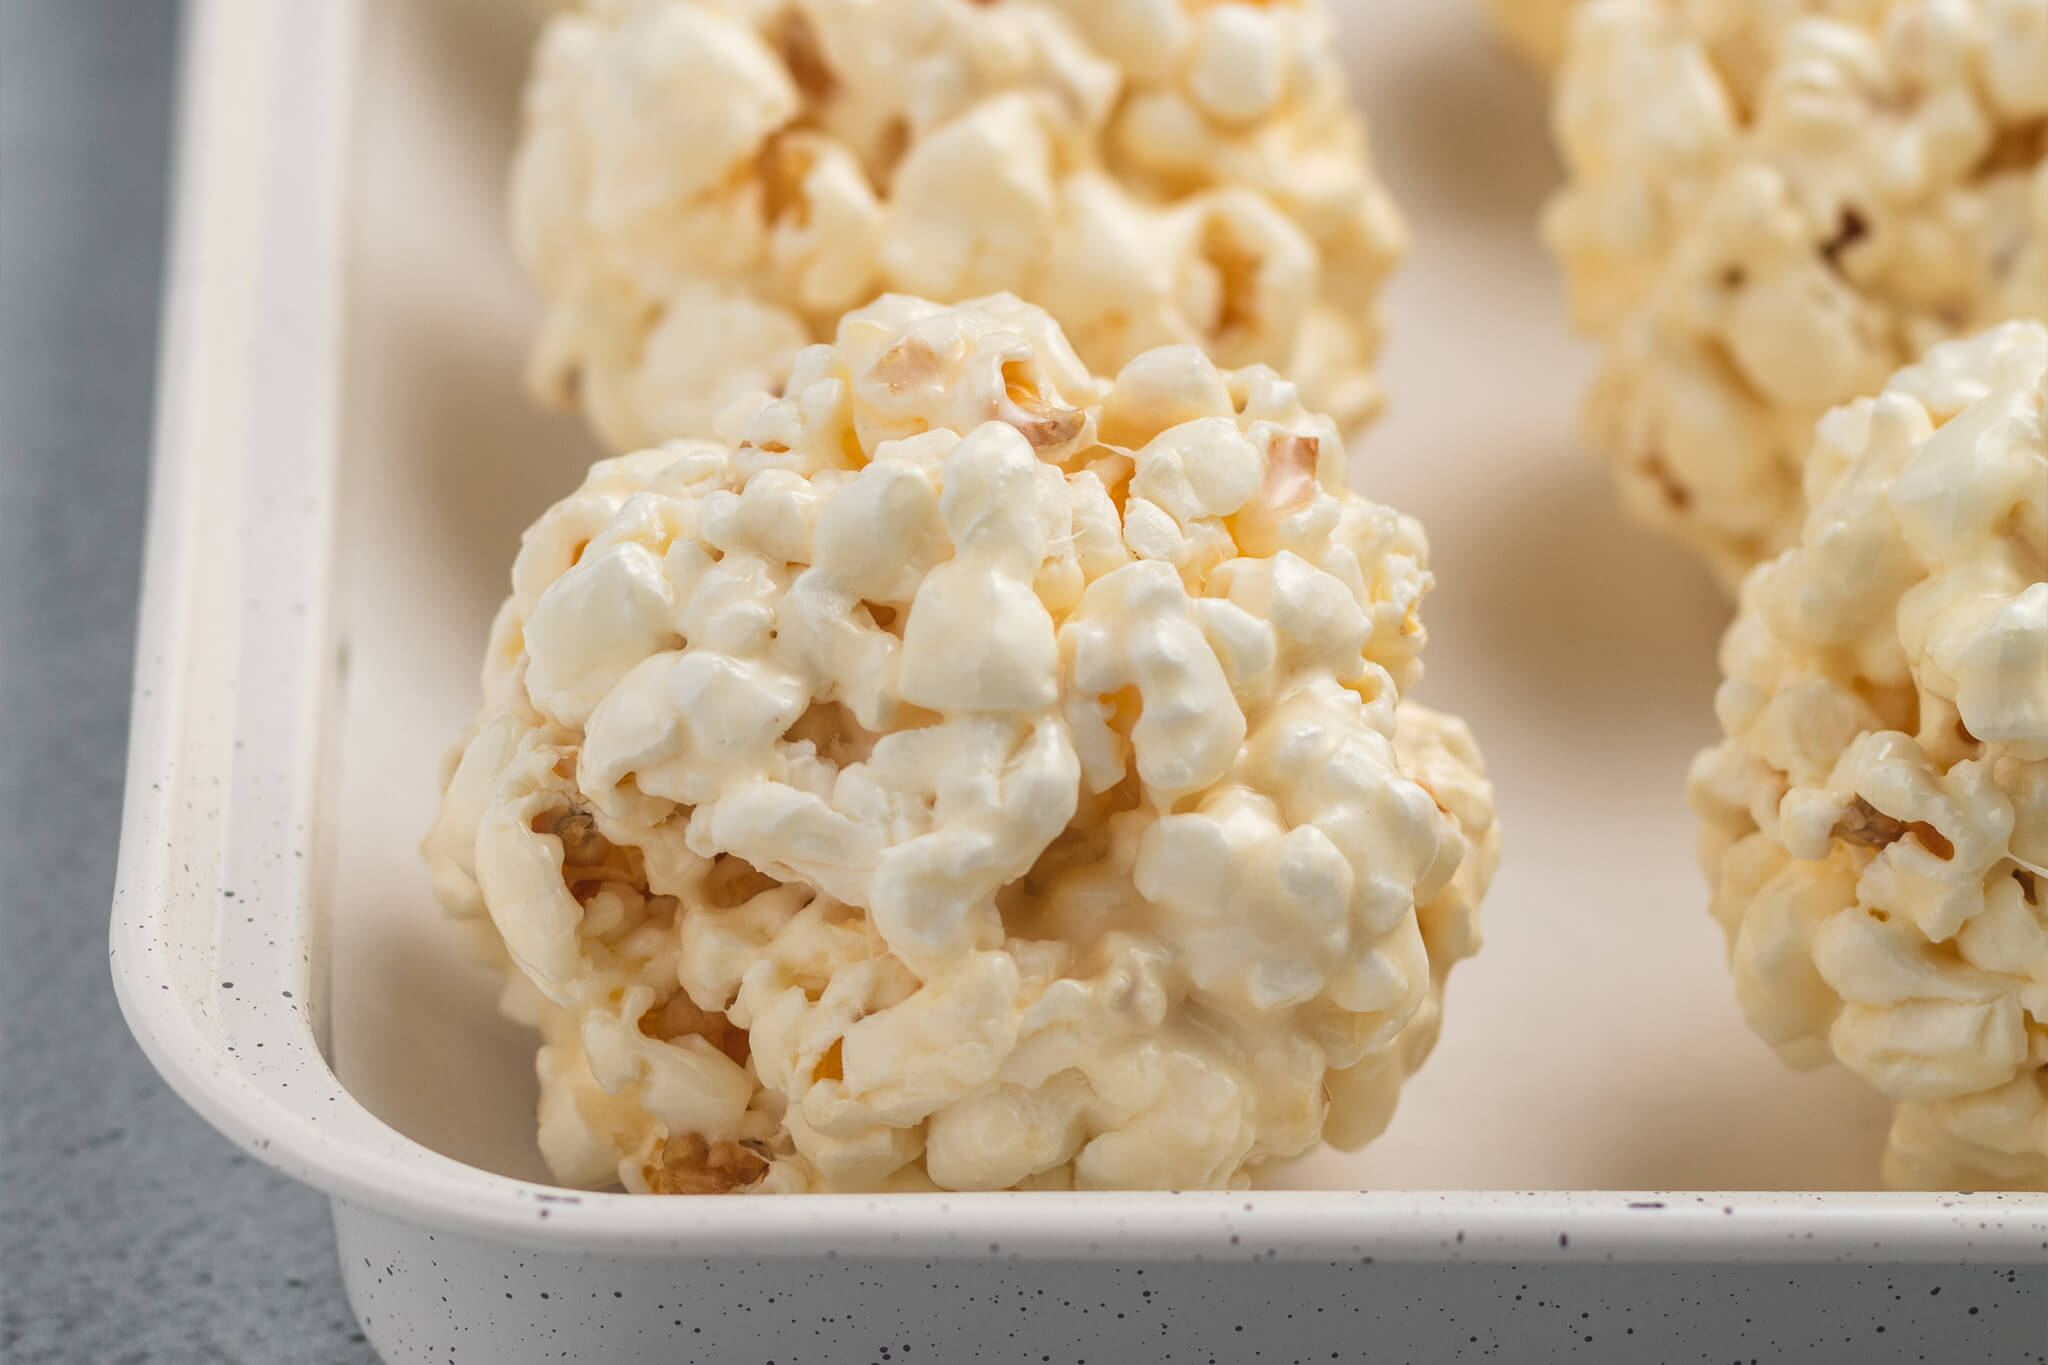 Marshmallow popcorn formed into balls on a lined cookie sheet